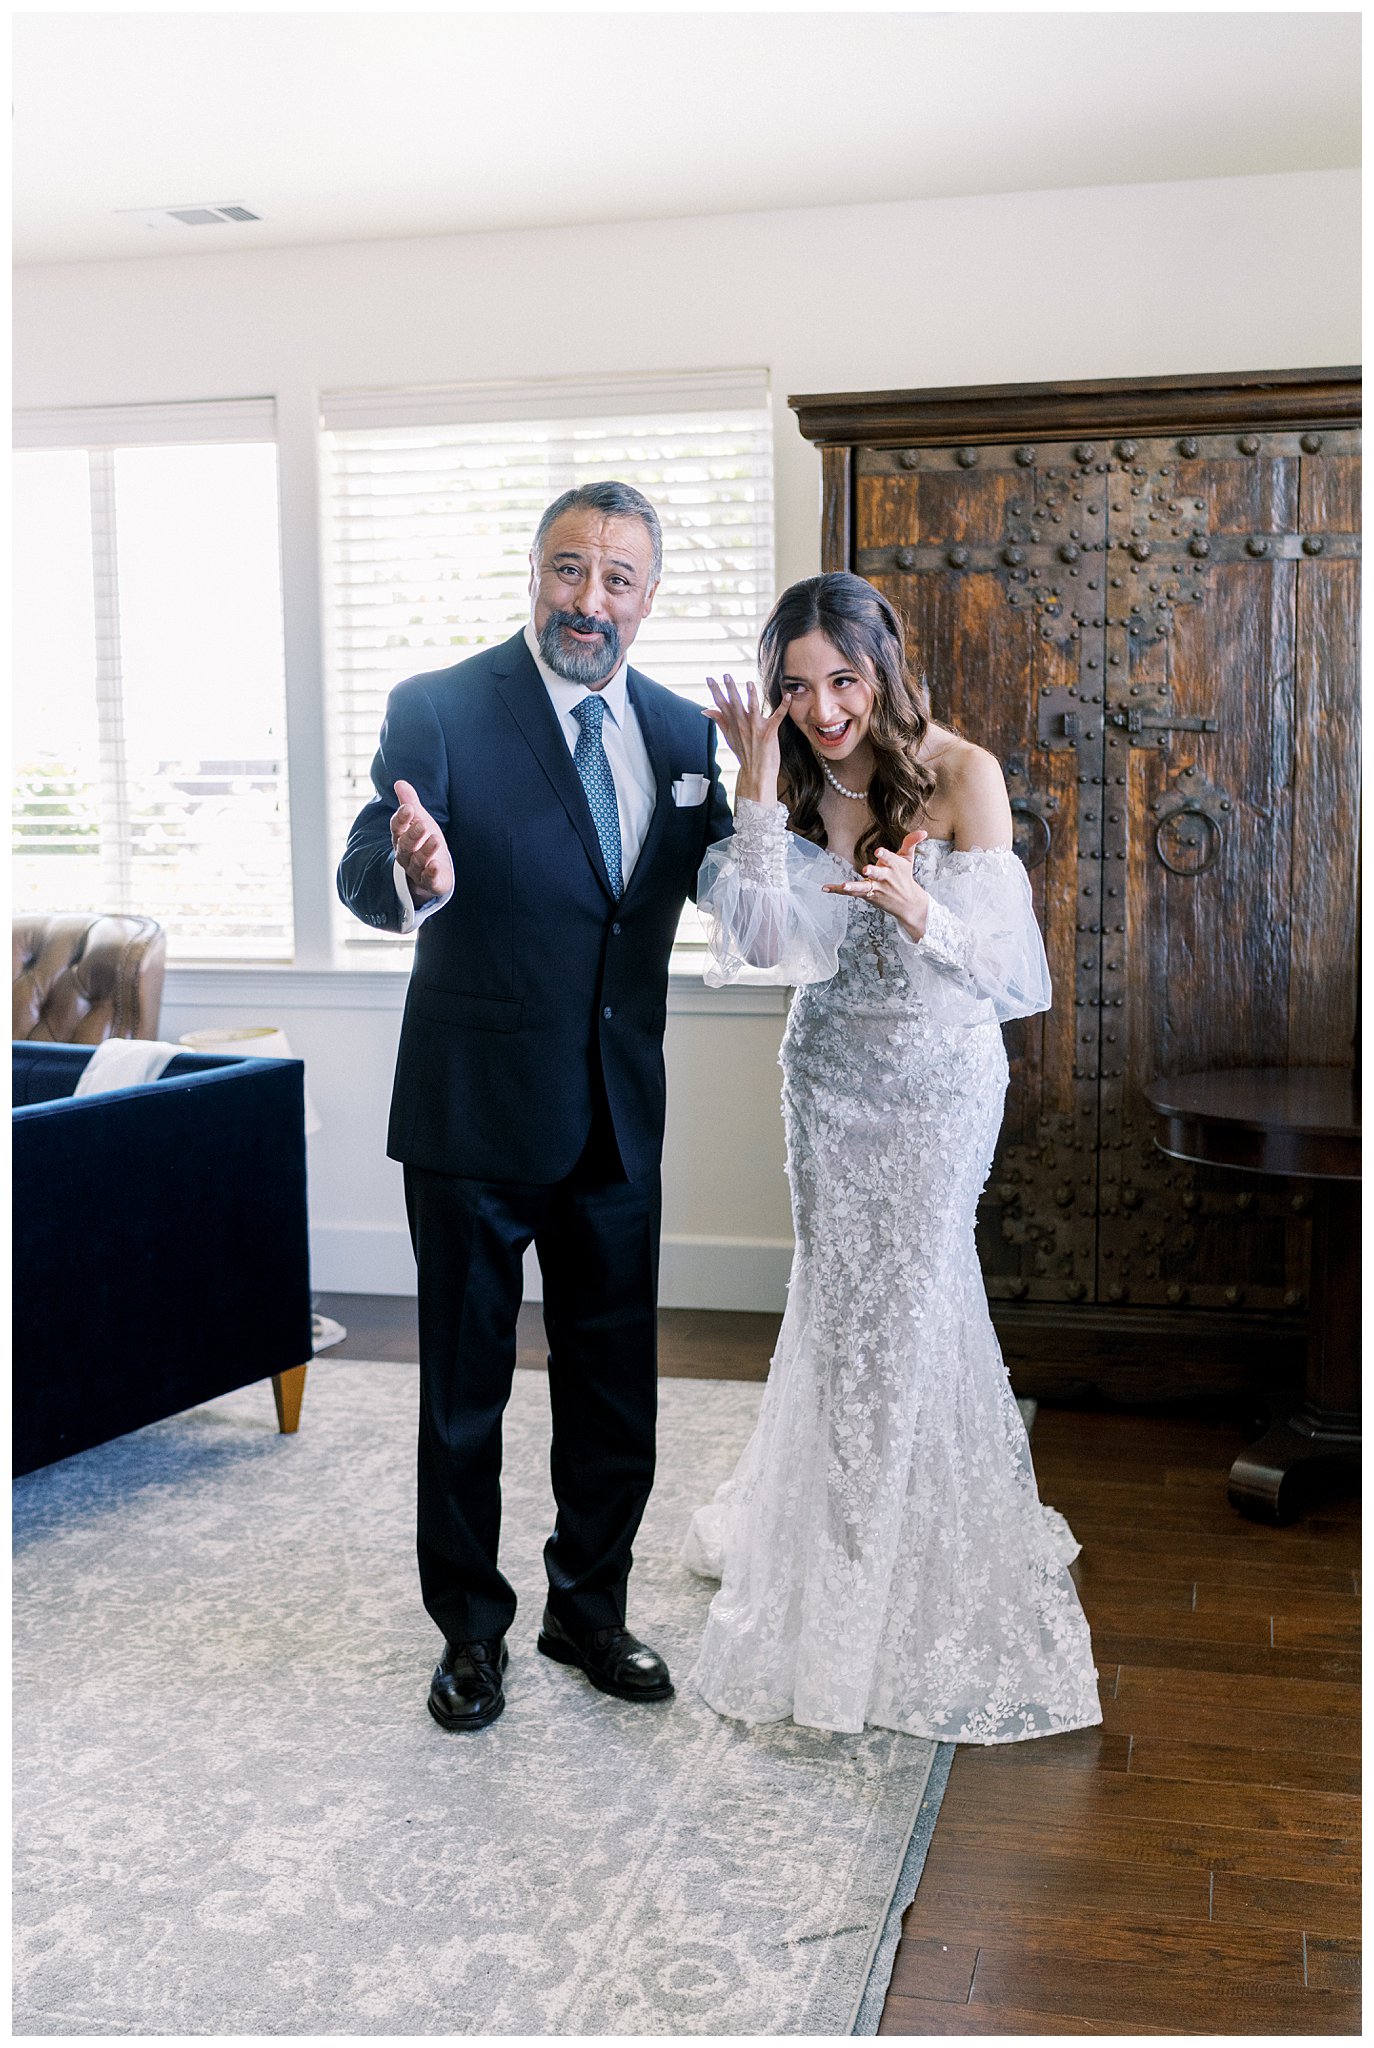 A father and daughter first look at Bella Terra Vineyards in Paso Robles during a classic wedding ceremony.